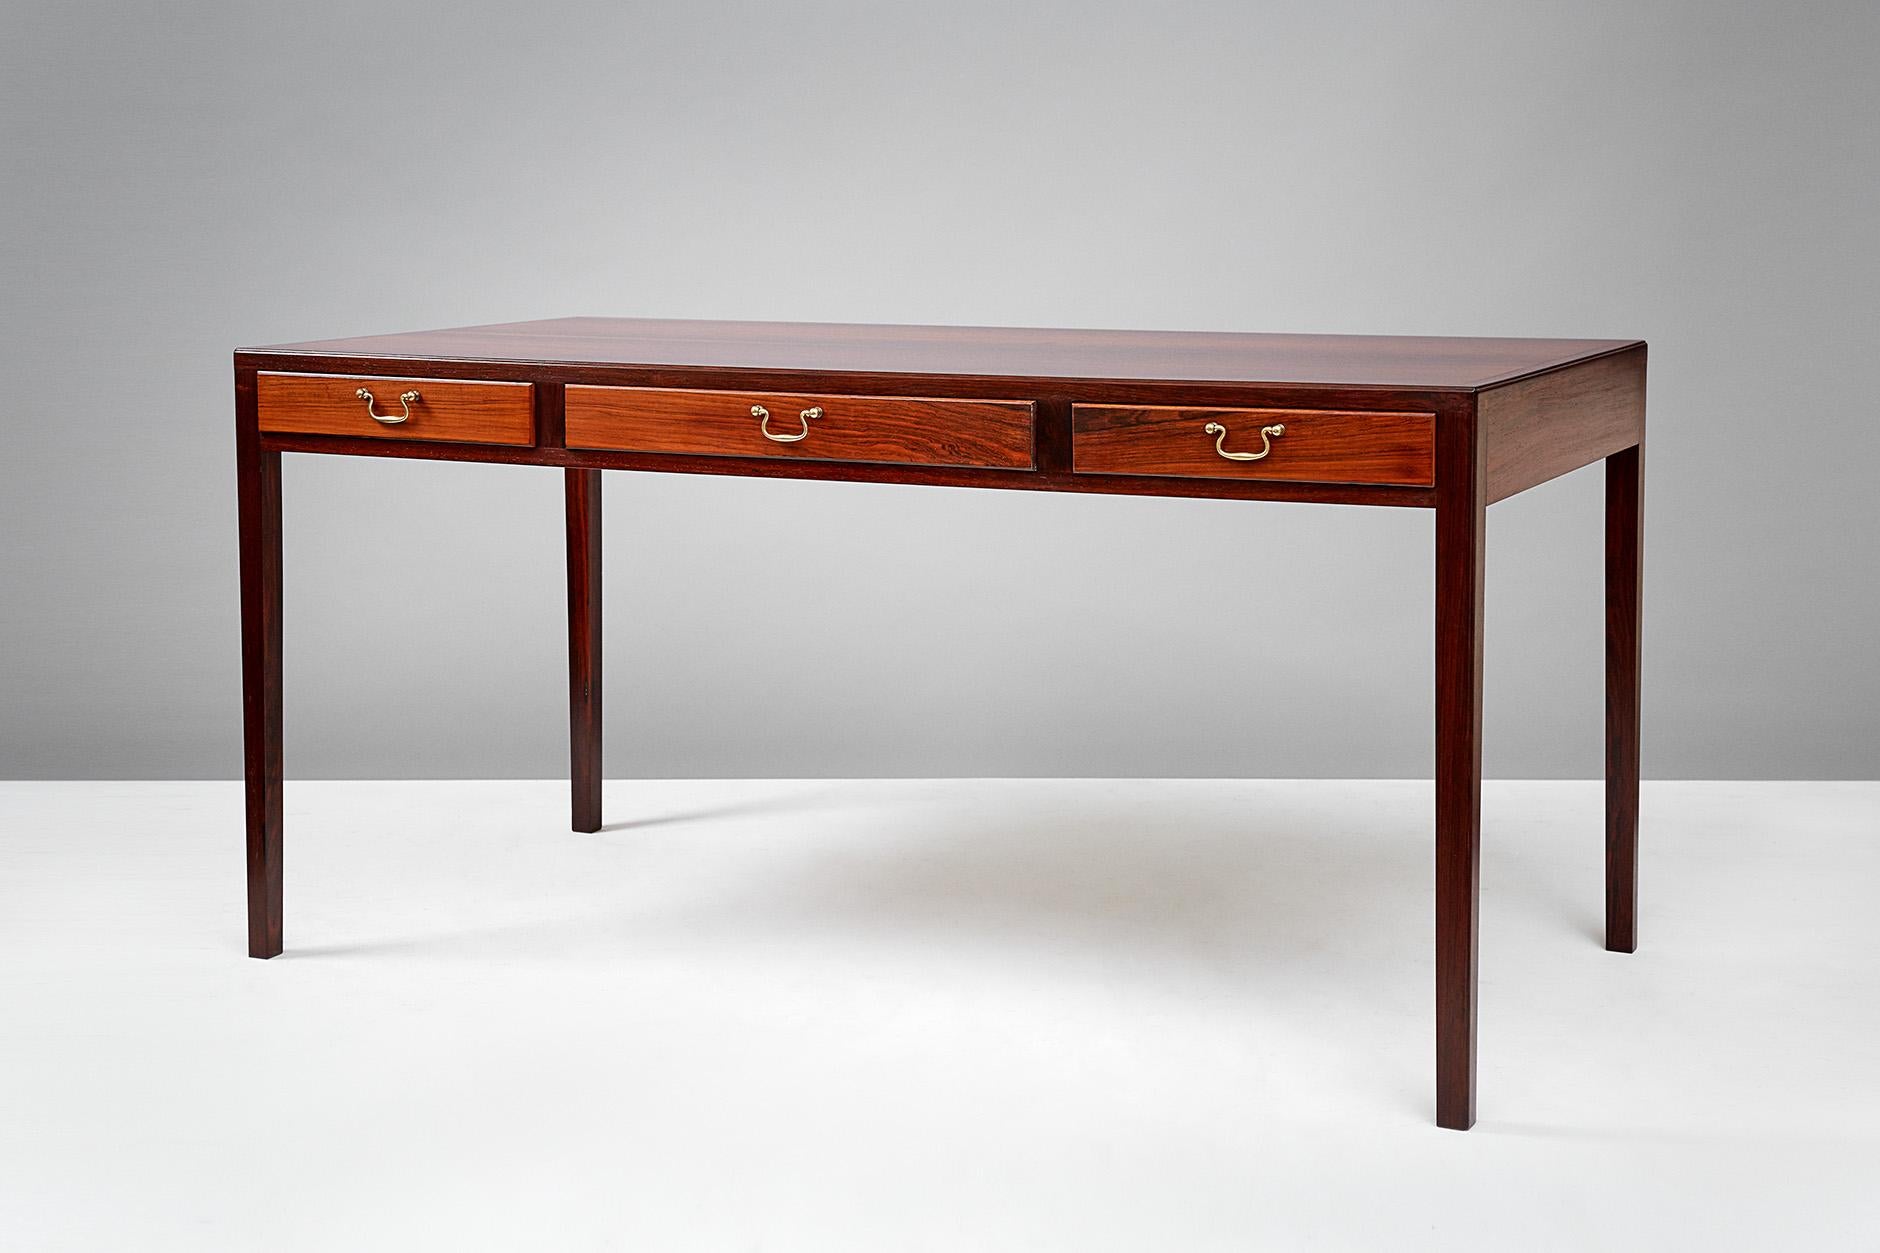 Jacob Kjaer

Writing desk, circa 1950s

Desk made from Brazilian rosewood by master Danish cabinetmaker Jacob Kjaer. Three integral drawers with solid brass hardware.